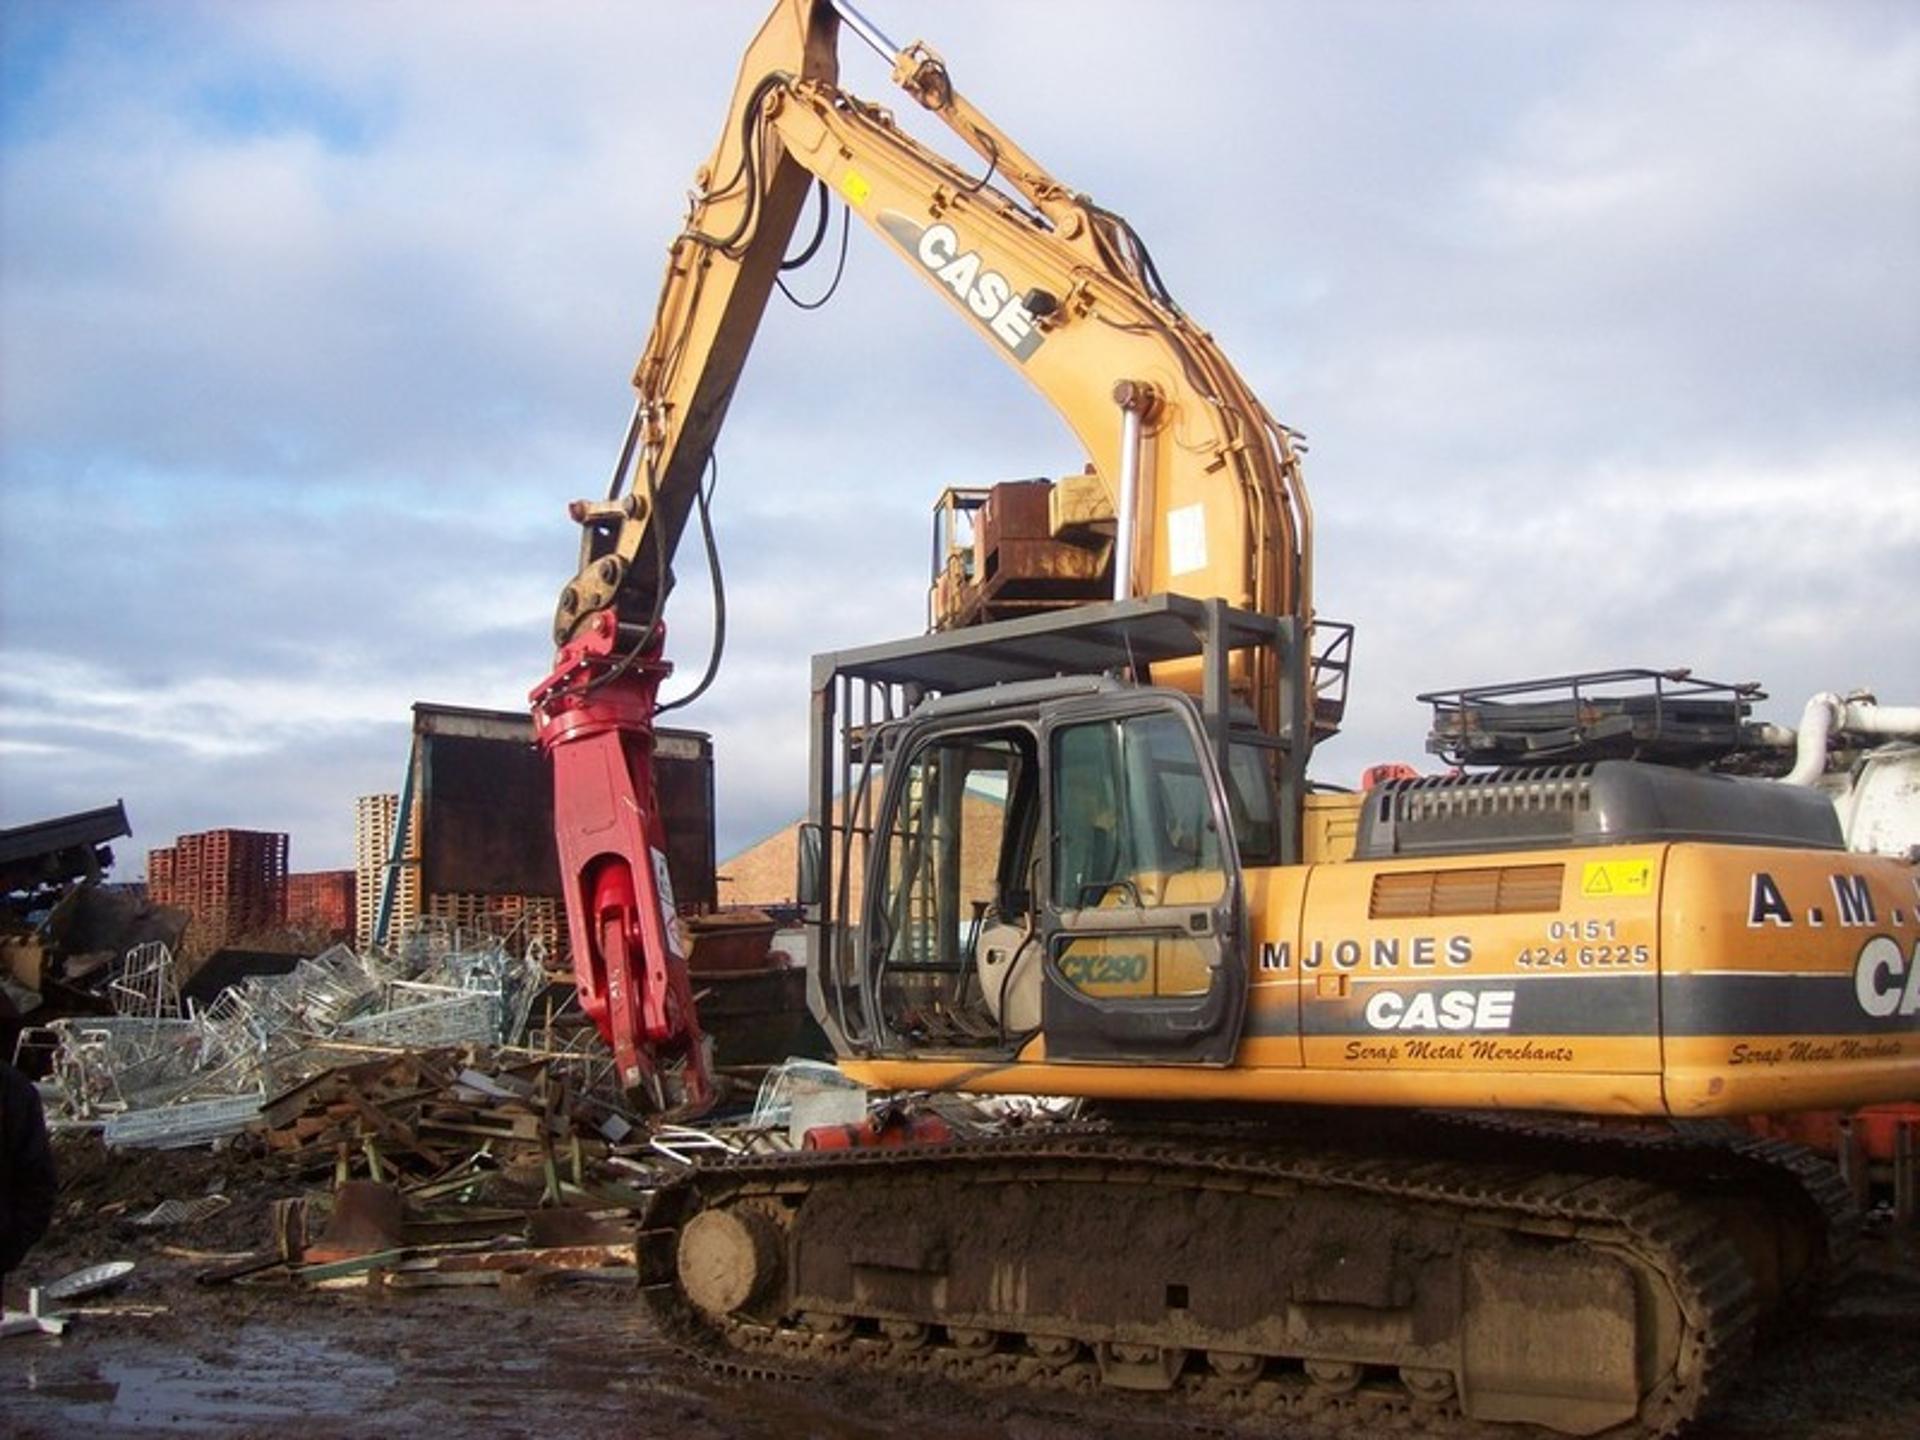 £500k turnover scrapyard for sale with near £1m asking price